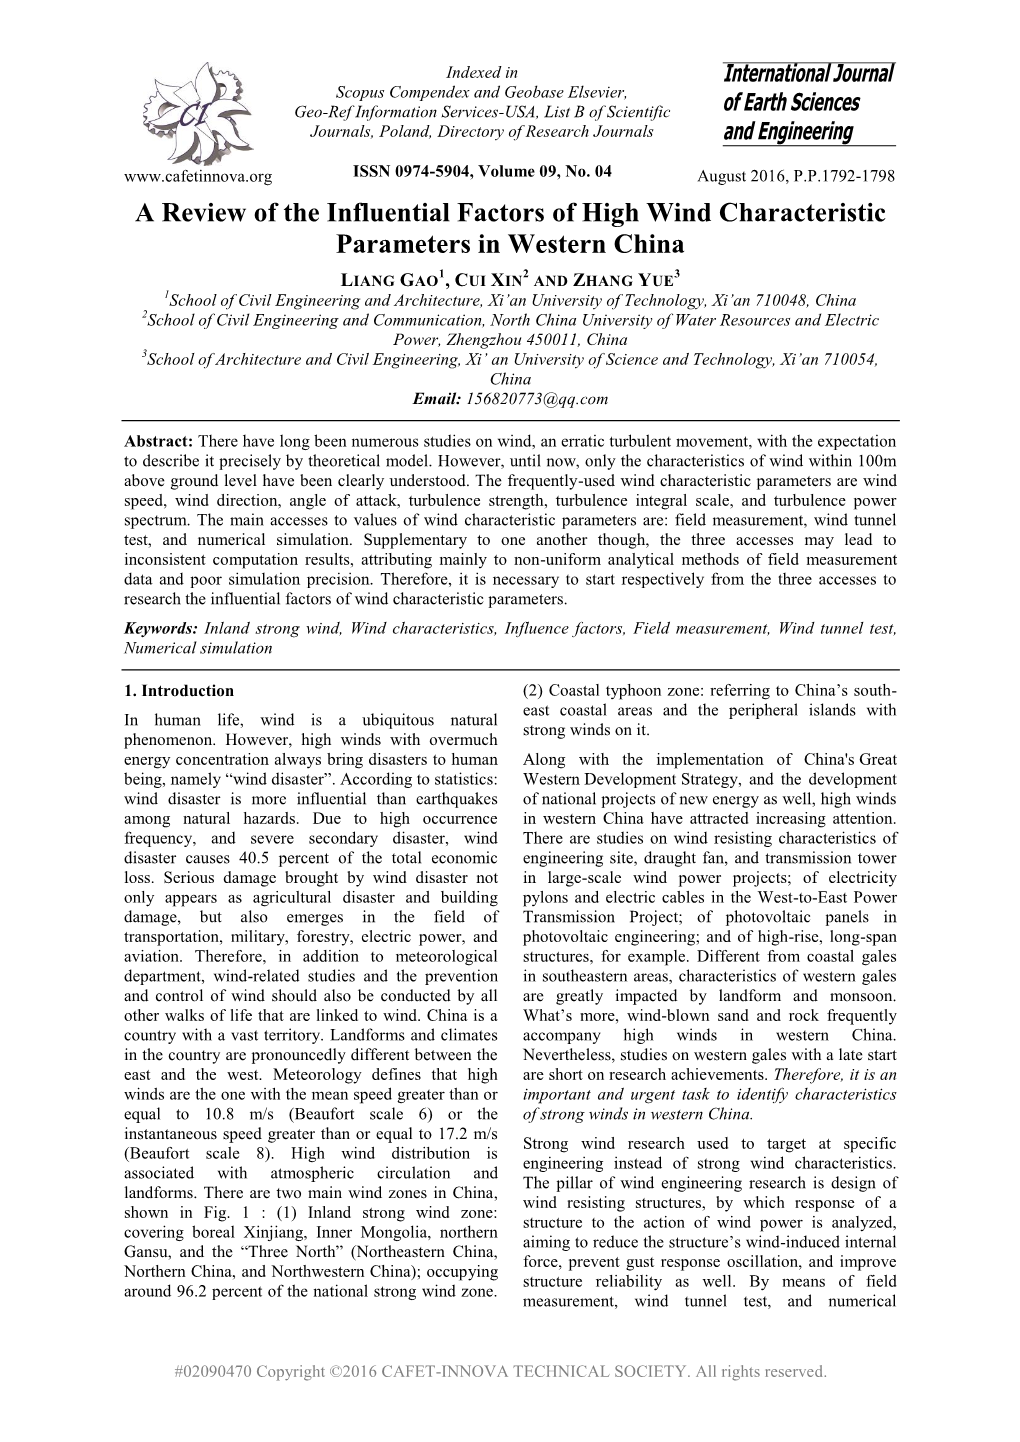 A Review of the Influential Factors of High Wind Characteristic Parameters in Western China